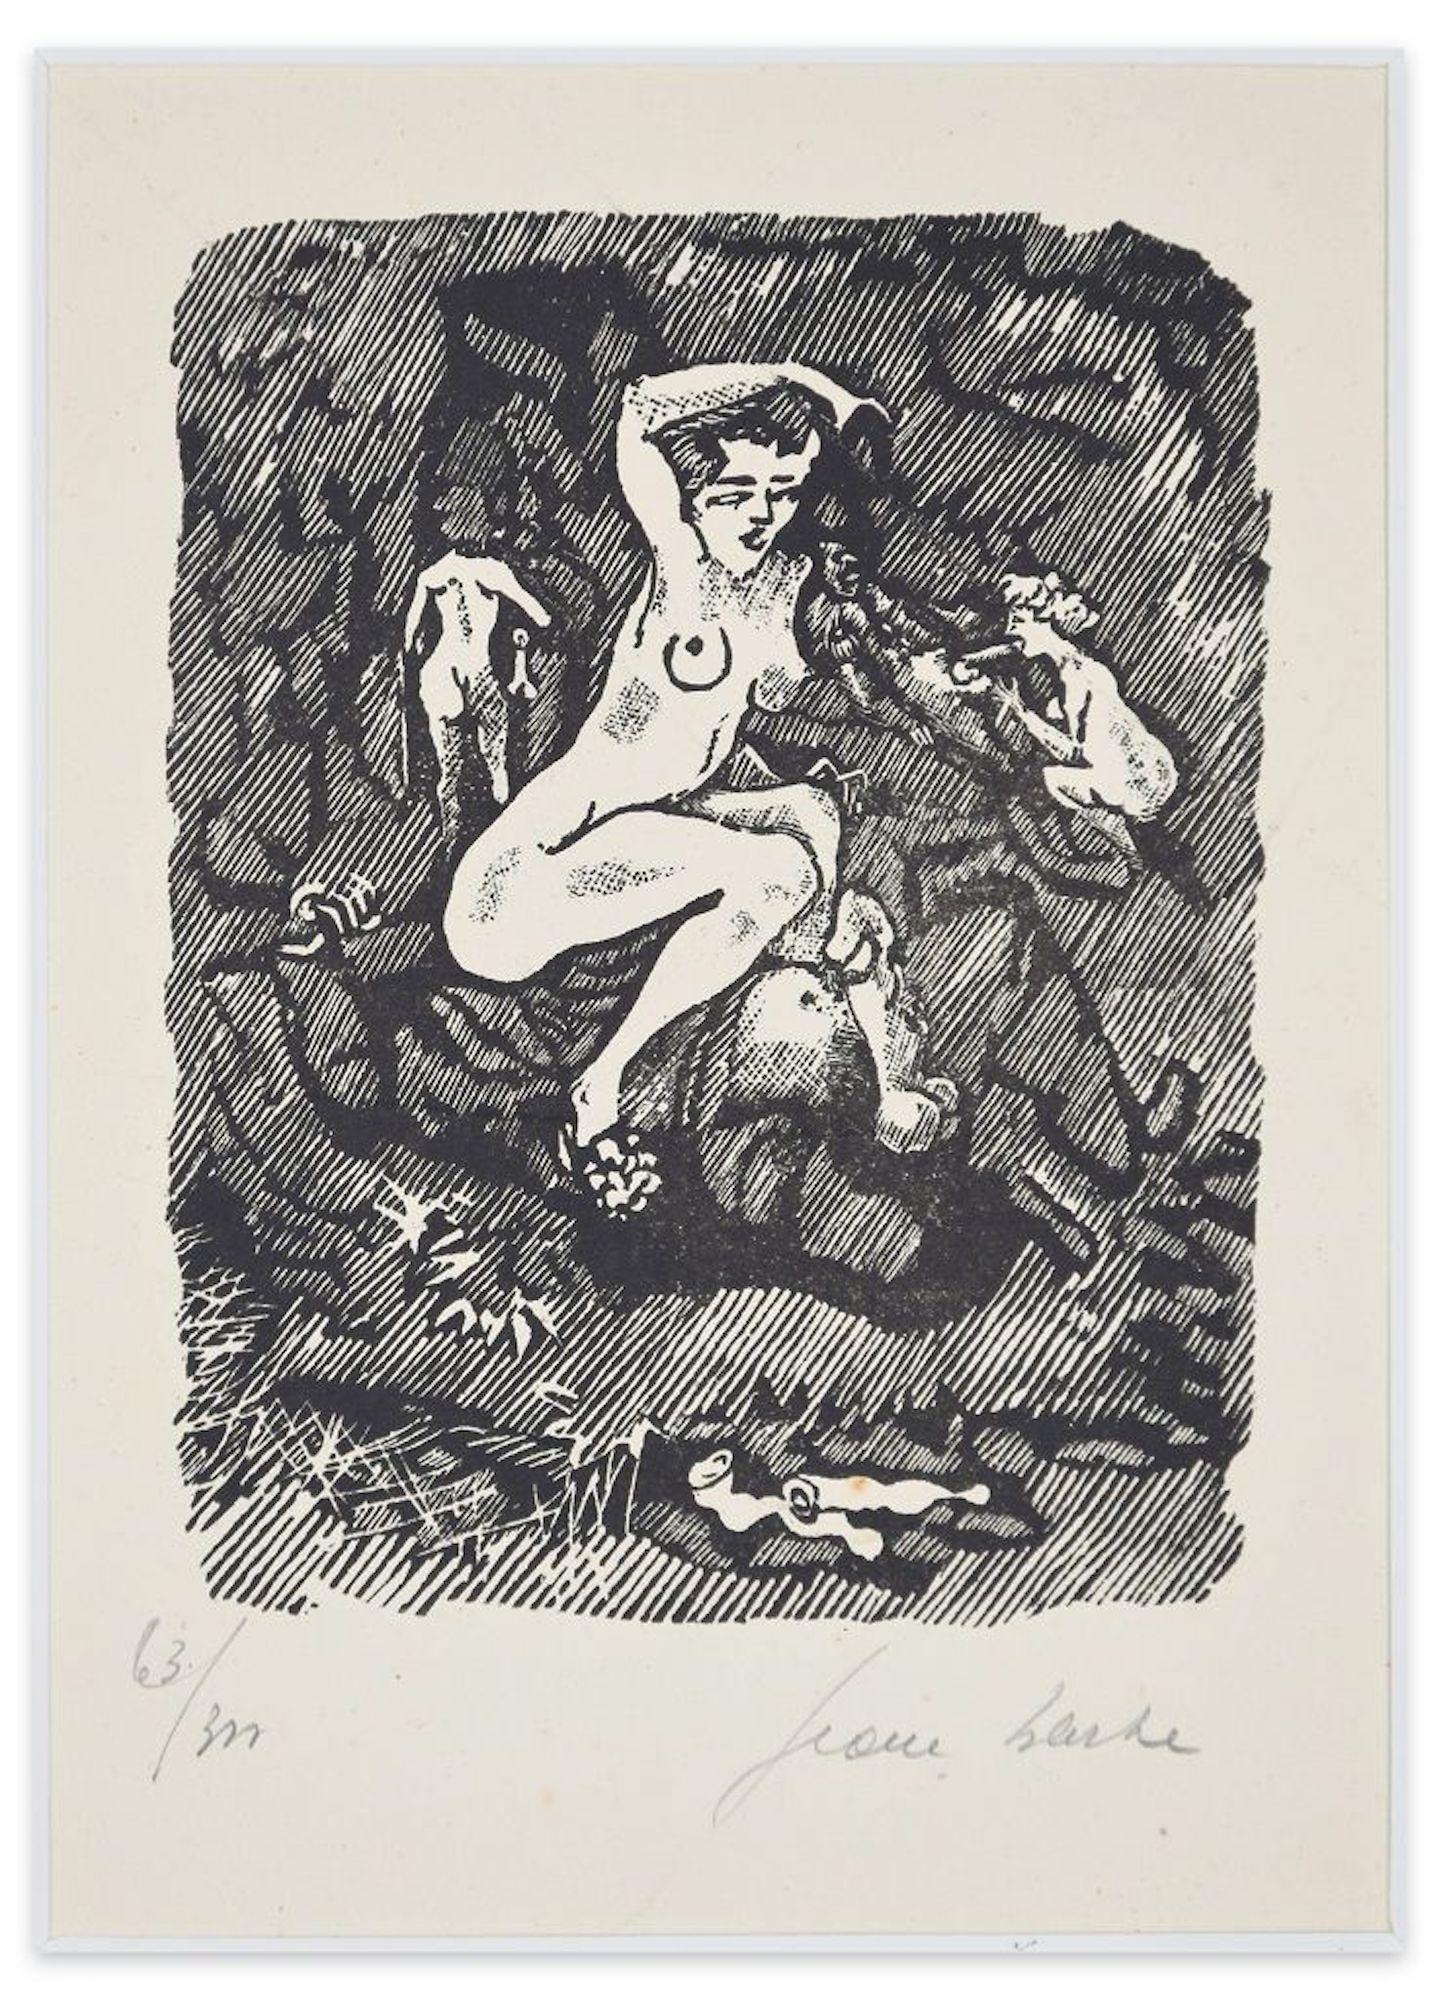 Image dimensions: 15 x 11.5 cm.

Boudoir is a black and white linocut on ivory-colored paper, realized in 1945 by the Italian satiric master Mino Maccari (1898-1989).

Hand-signed with the pseudonym "Jean Barbe" and numbered in pencil and in Arabic